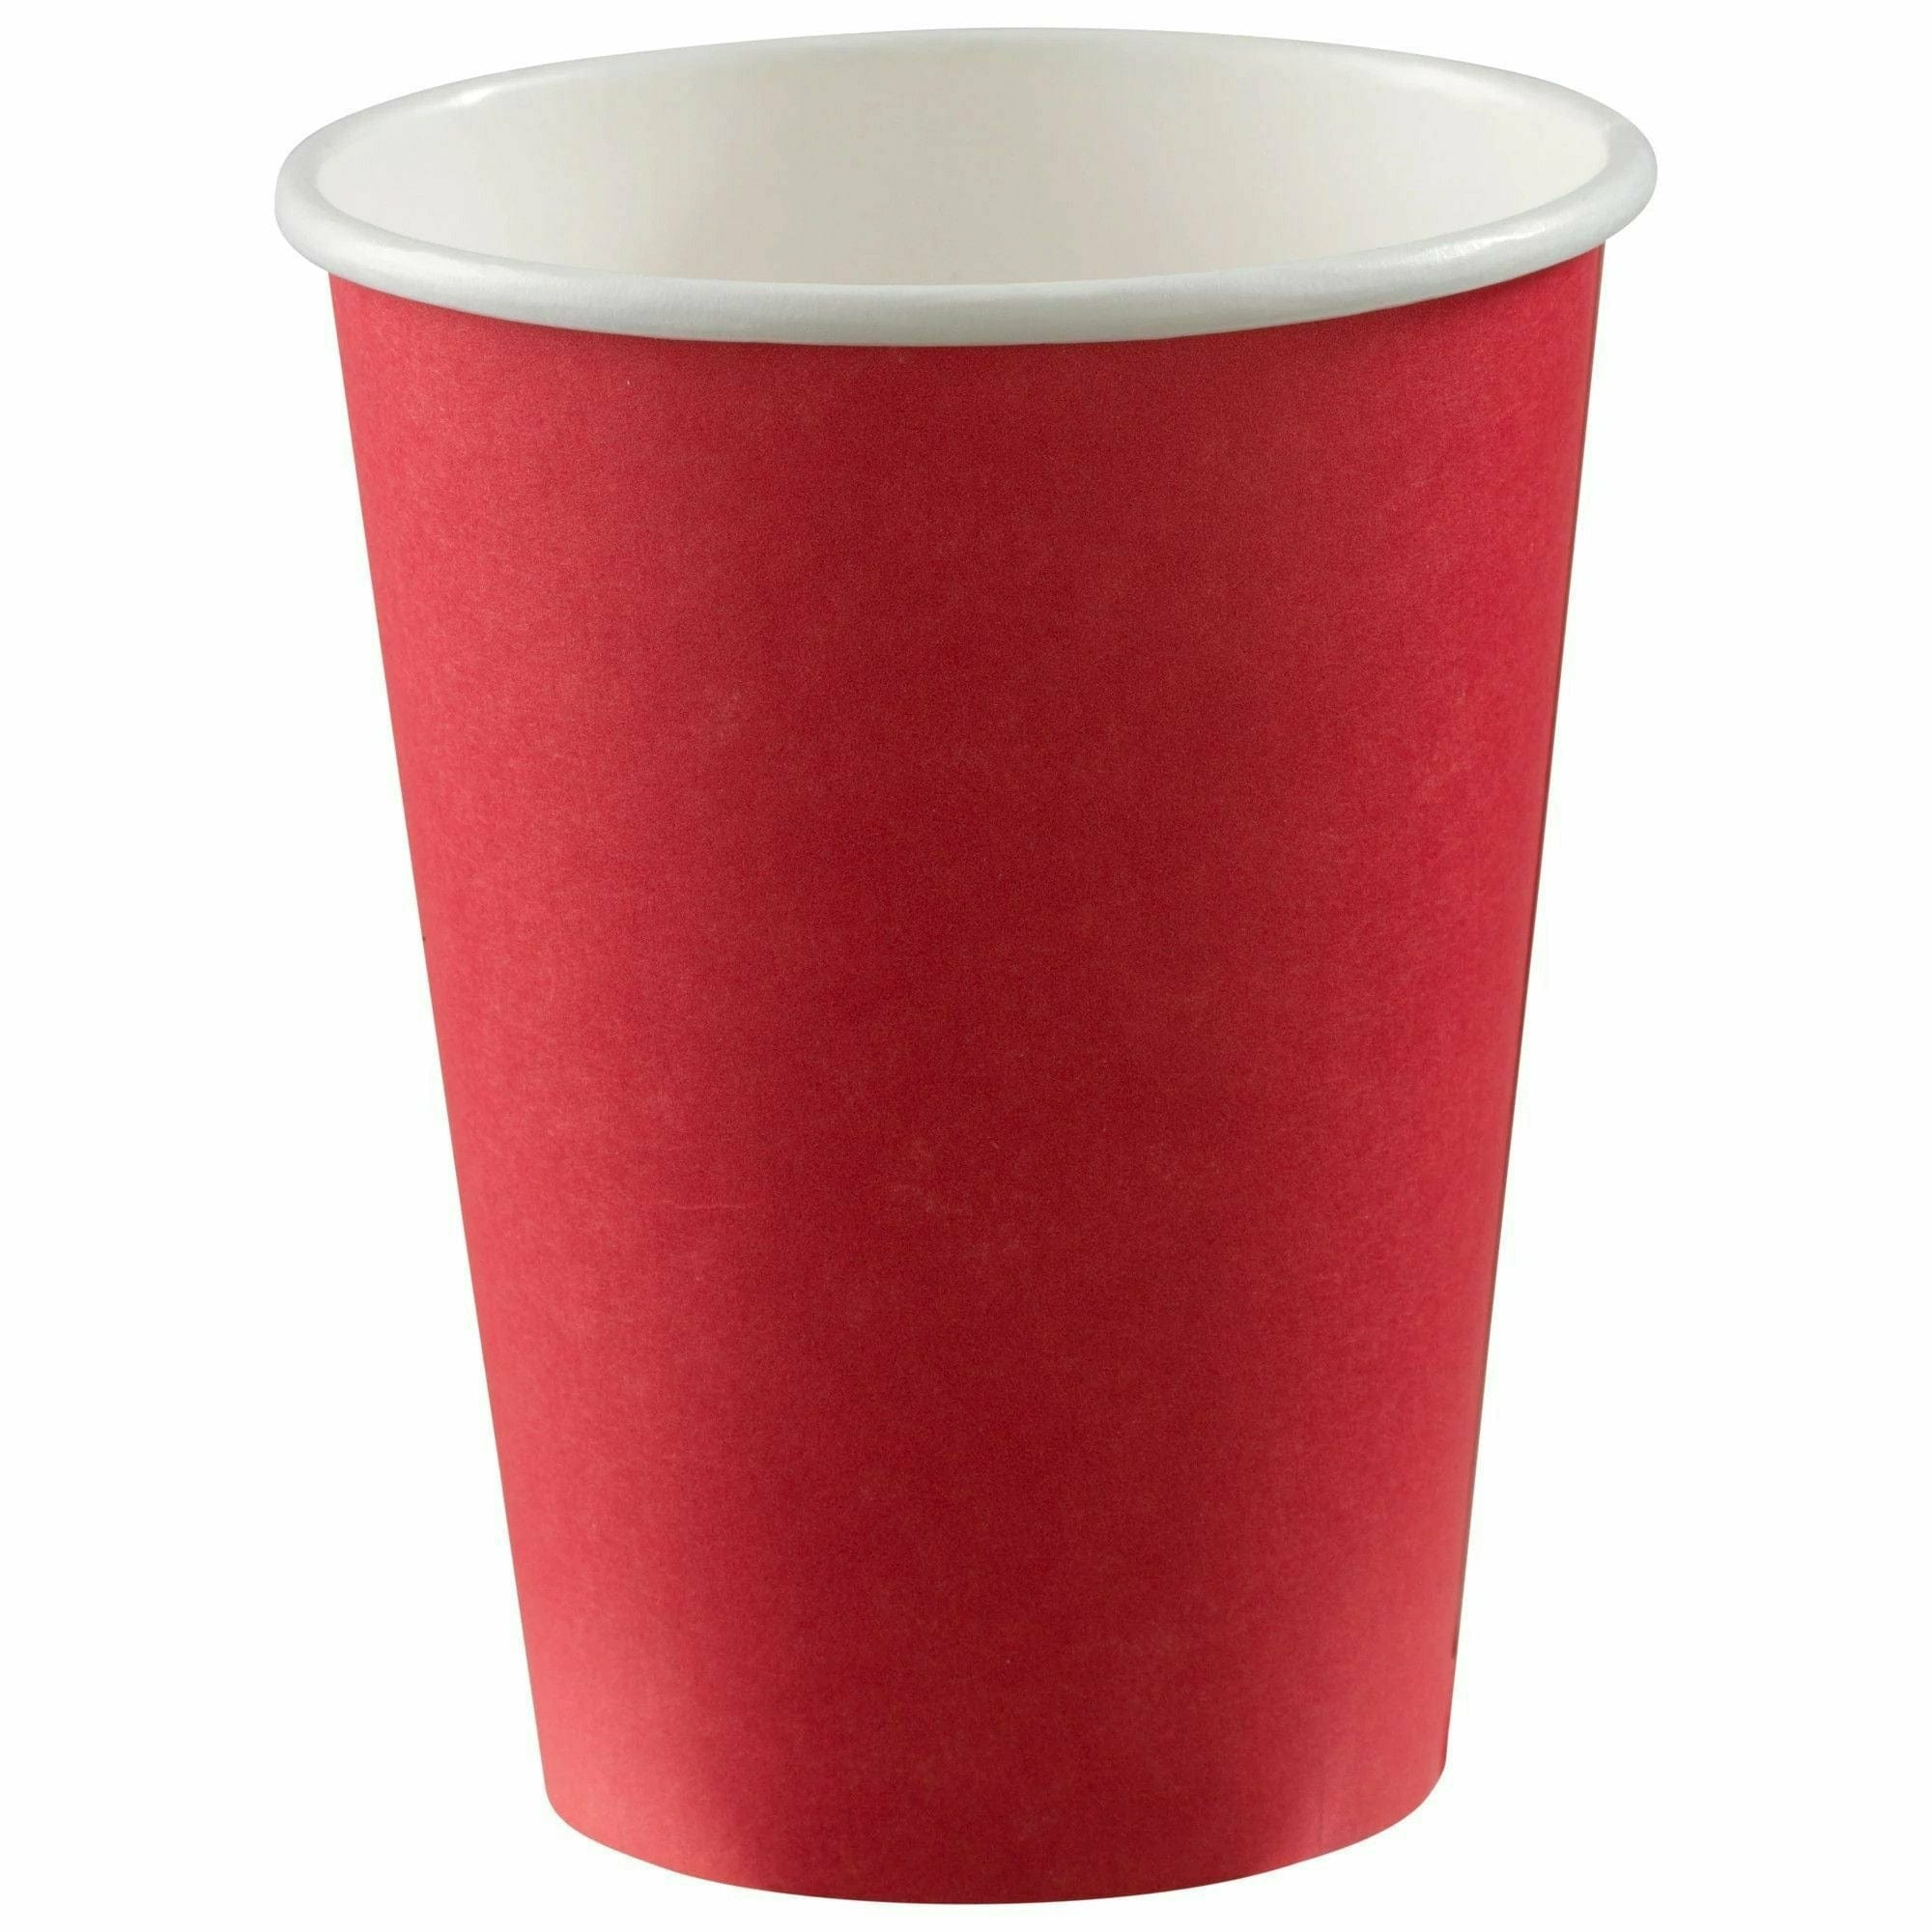 Amscan BASIC Apple Red - 12 oz. Paper Cups, 50 Ct.